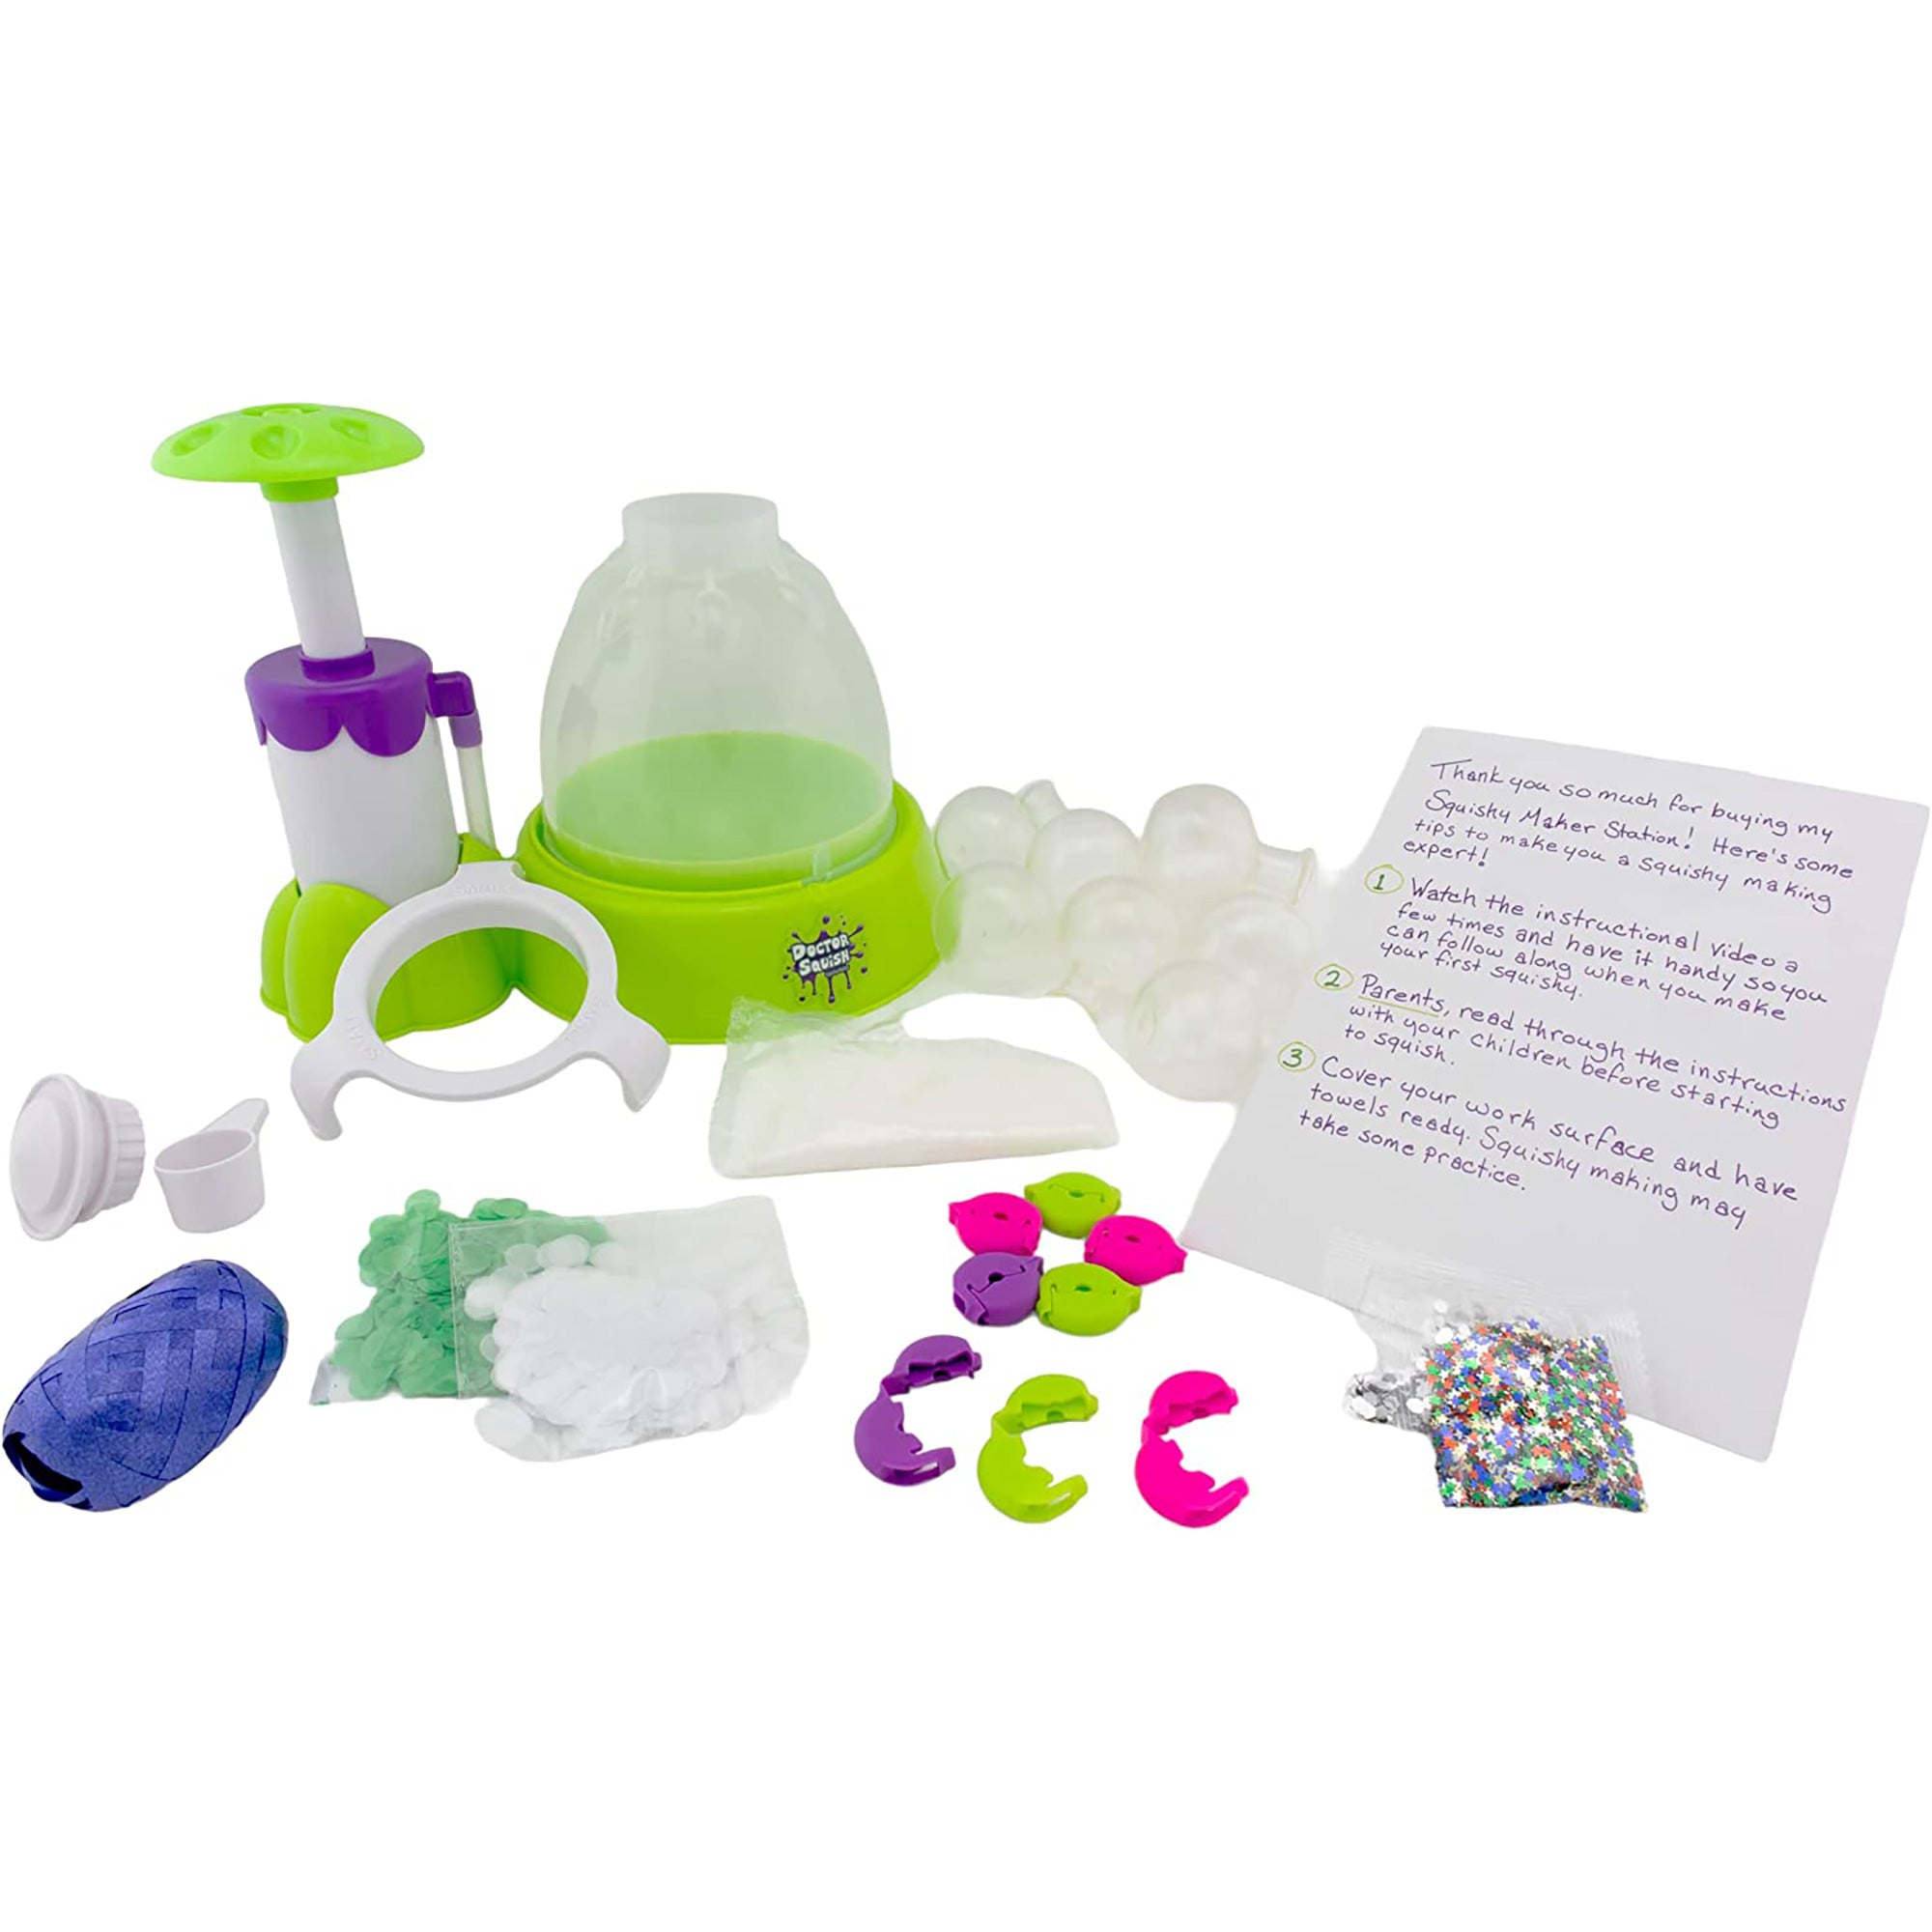 Dr. Squish Squishy Maker Station, 1 Count